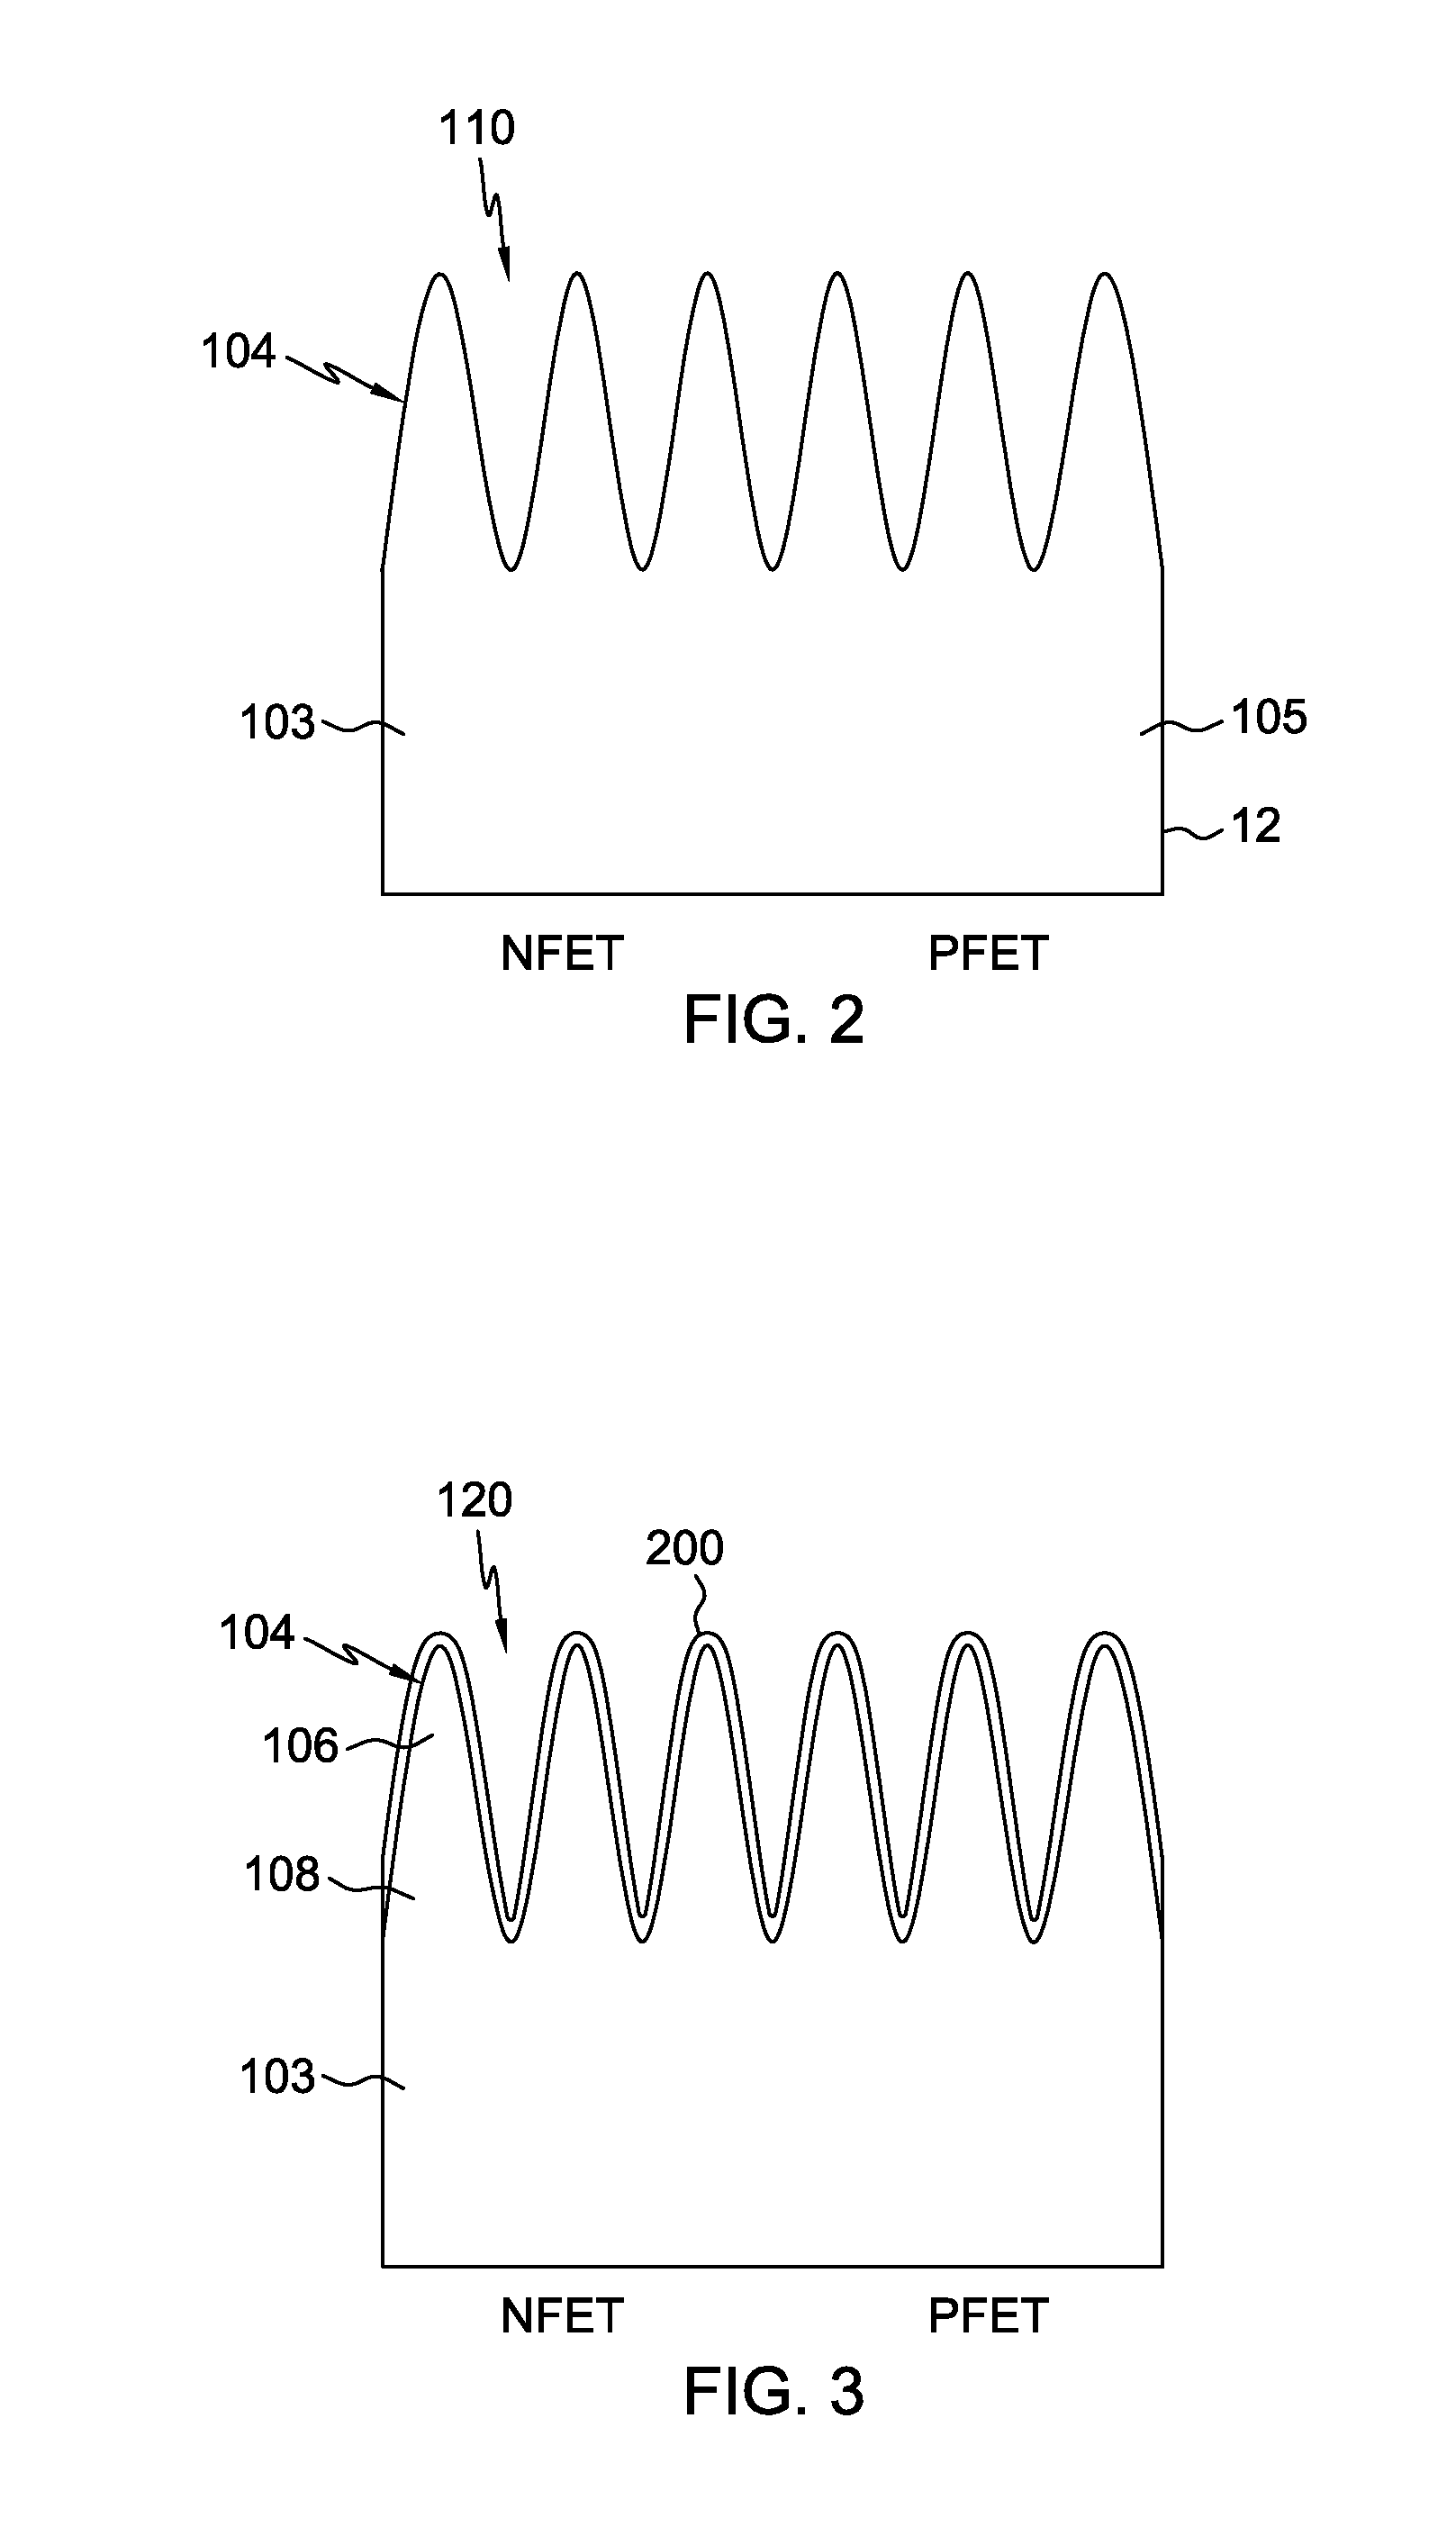 Methods for forming finfets having a capping layer for reducing punch through leakage